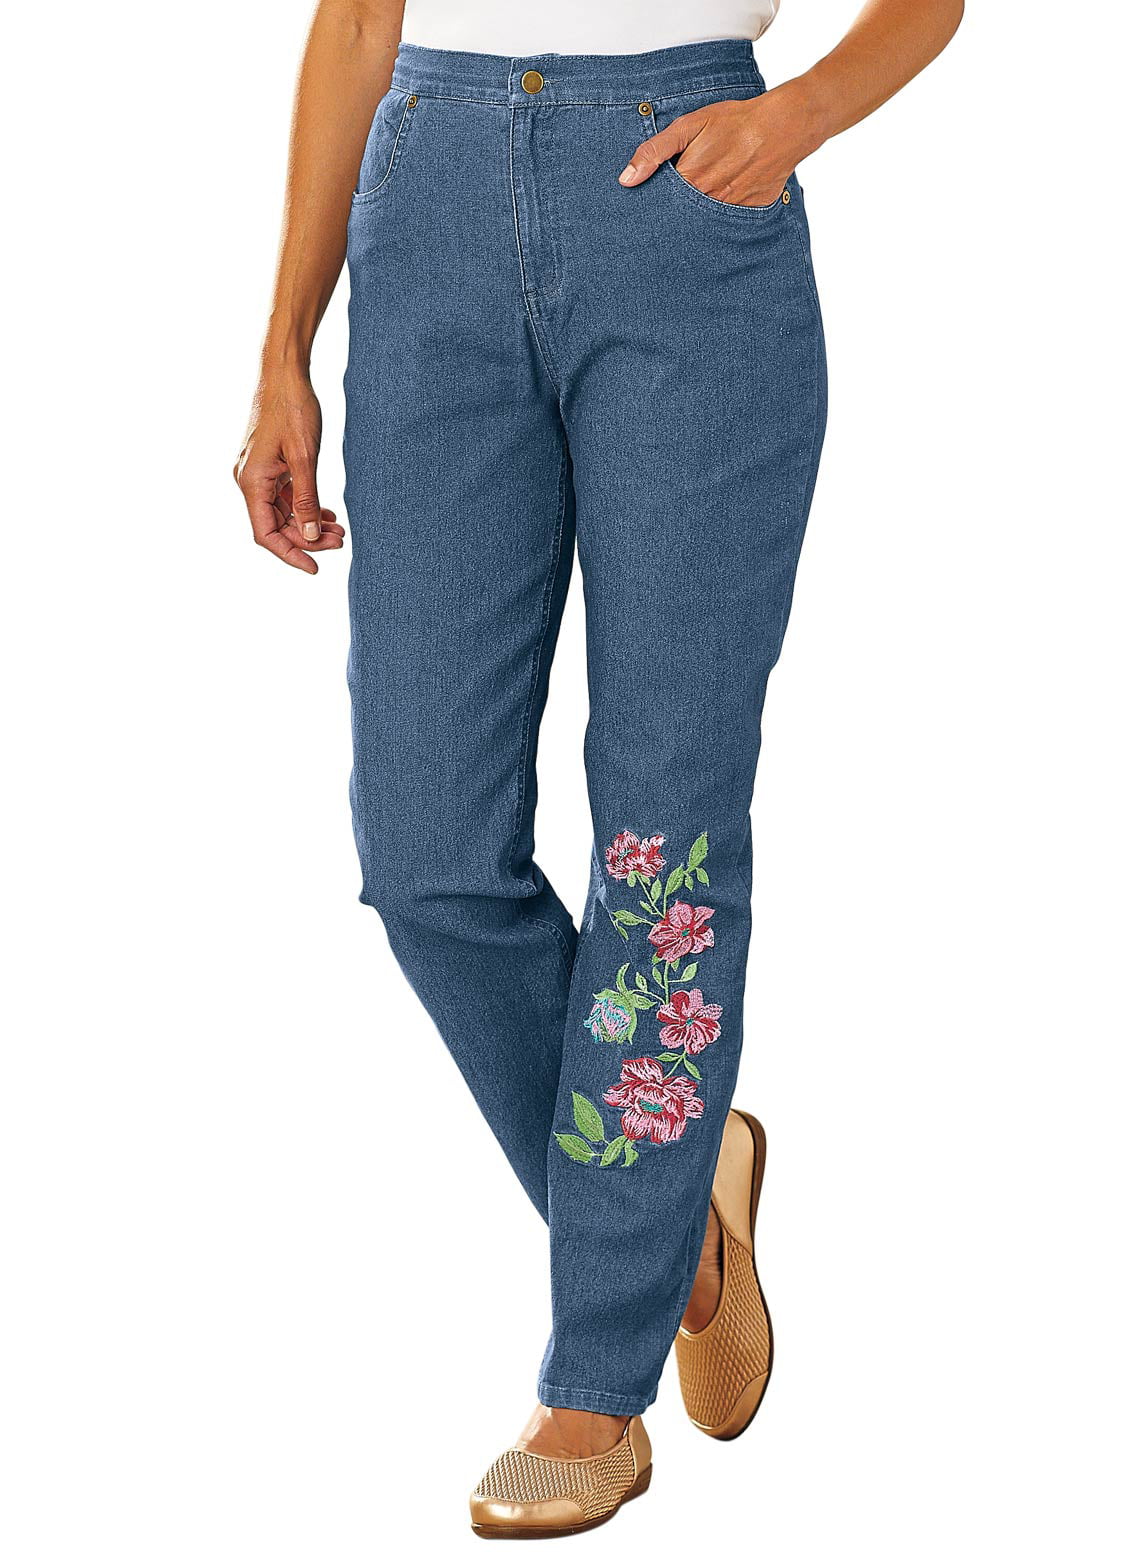 Floral Embroidered Jeans by Denim Moves - Walmart.com